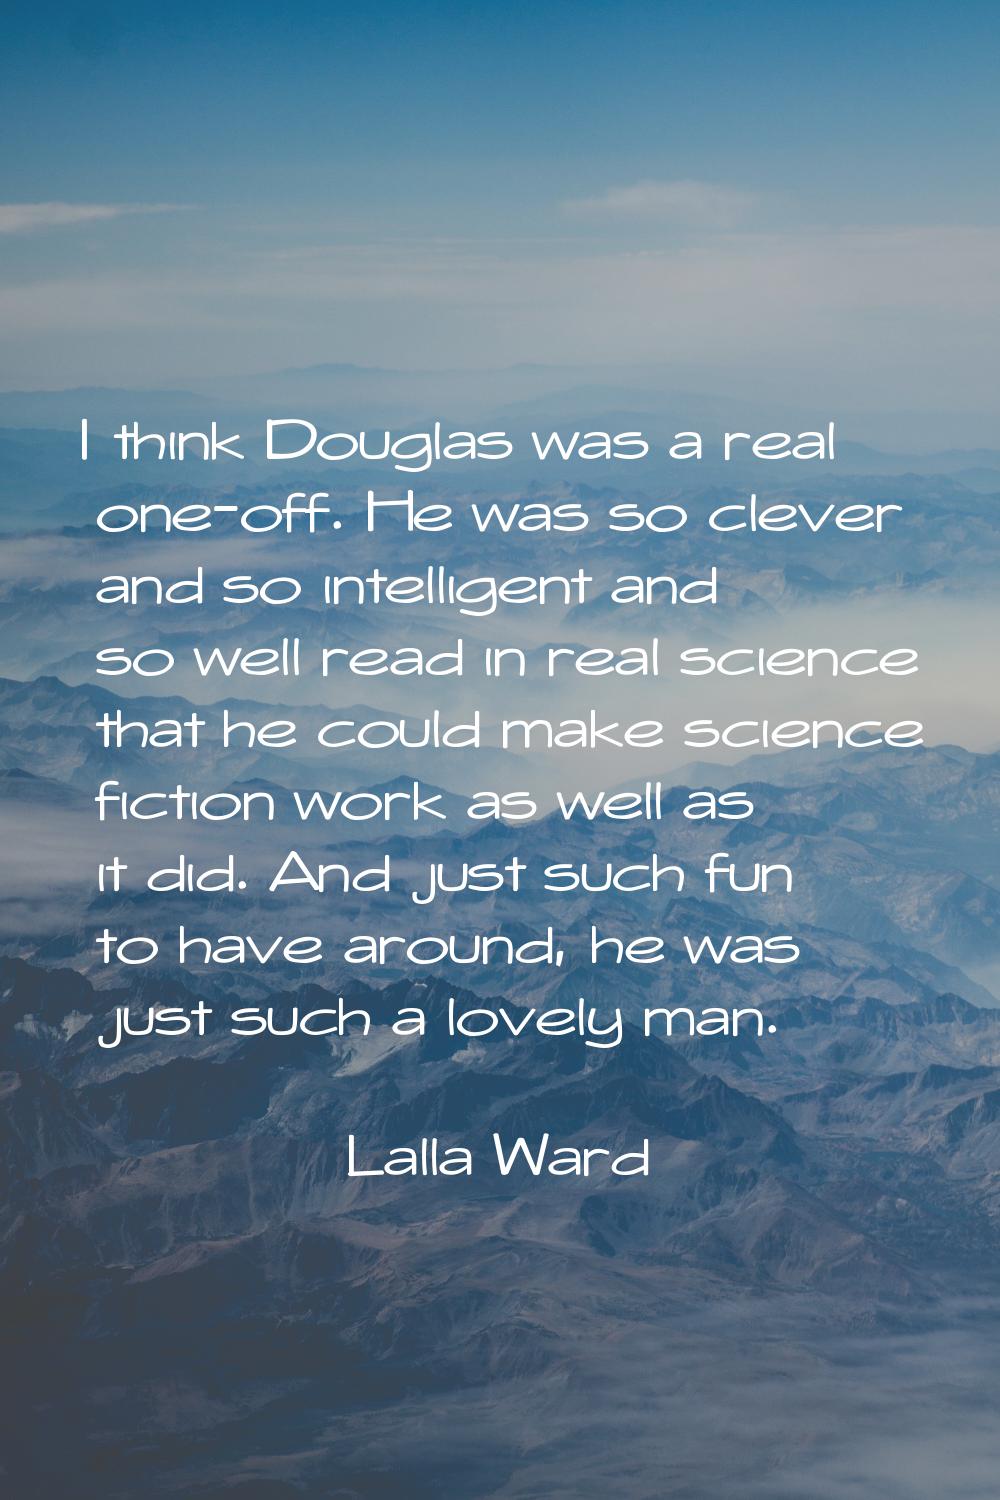 I think Douglas was a real one-off. He was so clever and so intelligent and so well read in real sc